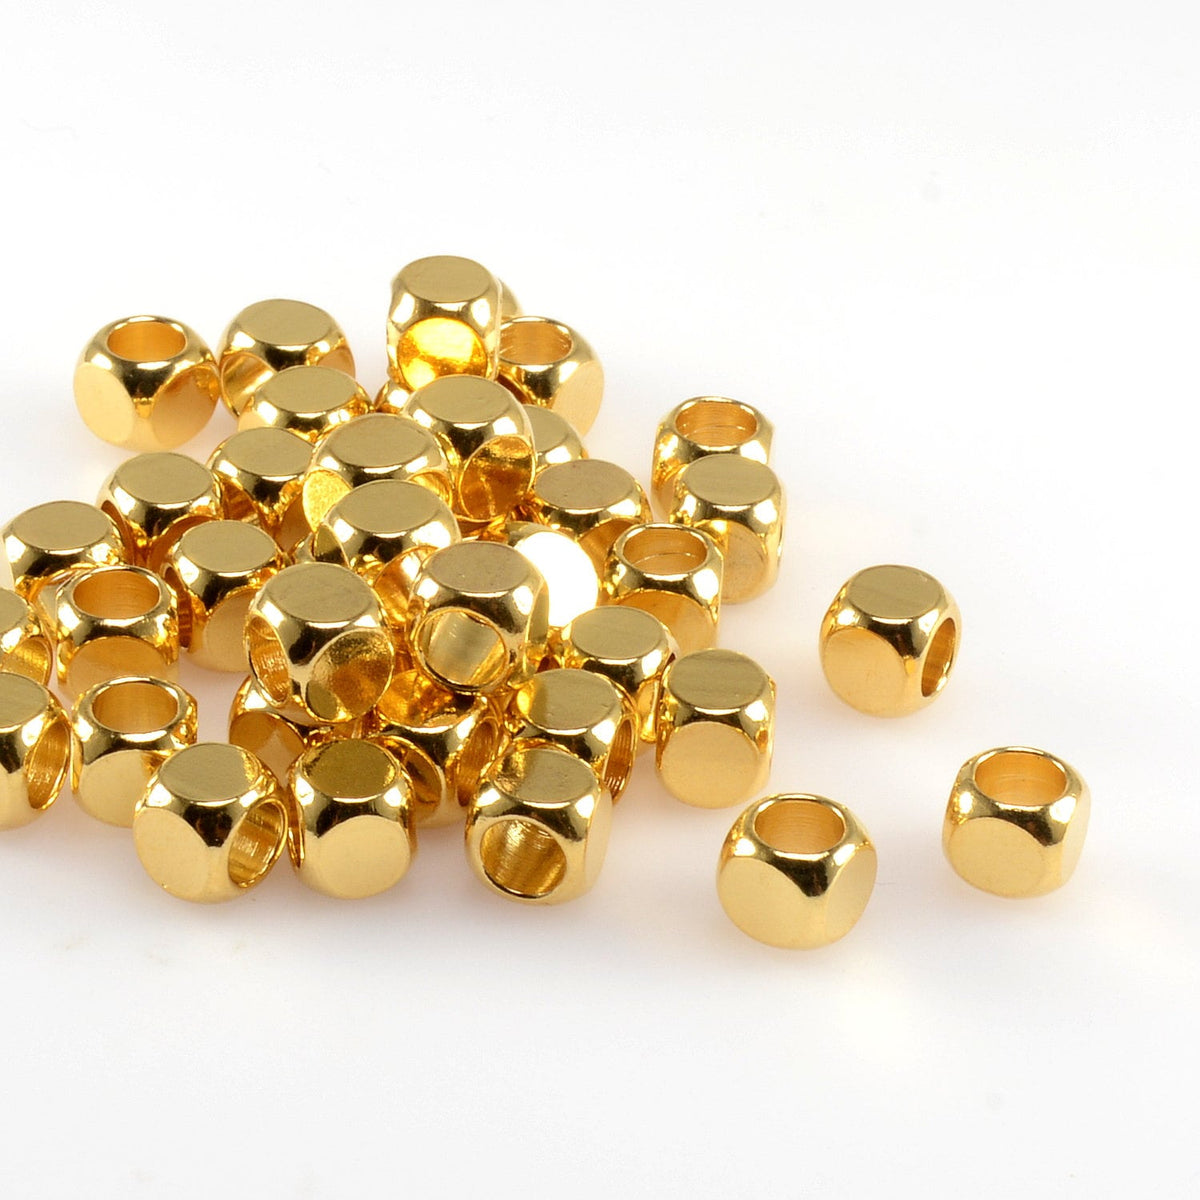 Cube Jewelry Beads in 22K GOLD Plating, 5mm with 3.6mm Large Hole, Squ –  UniqueBeadsNY